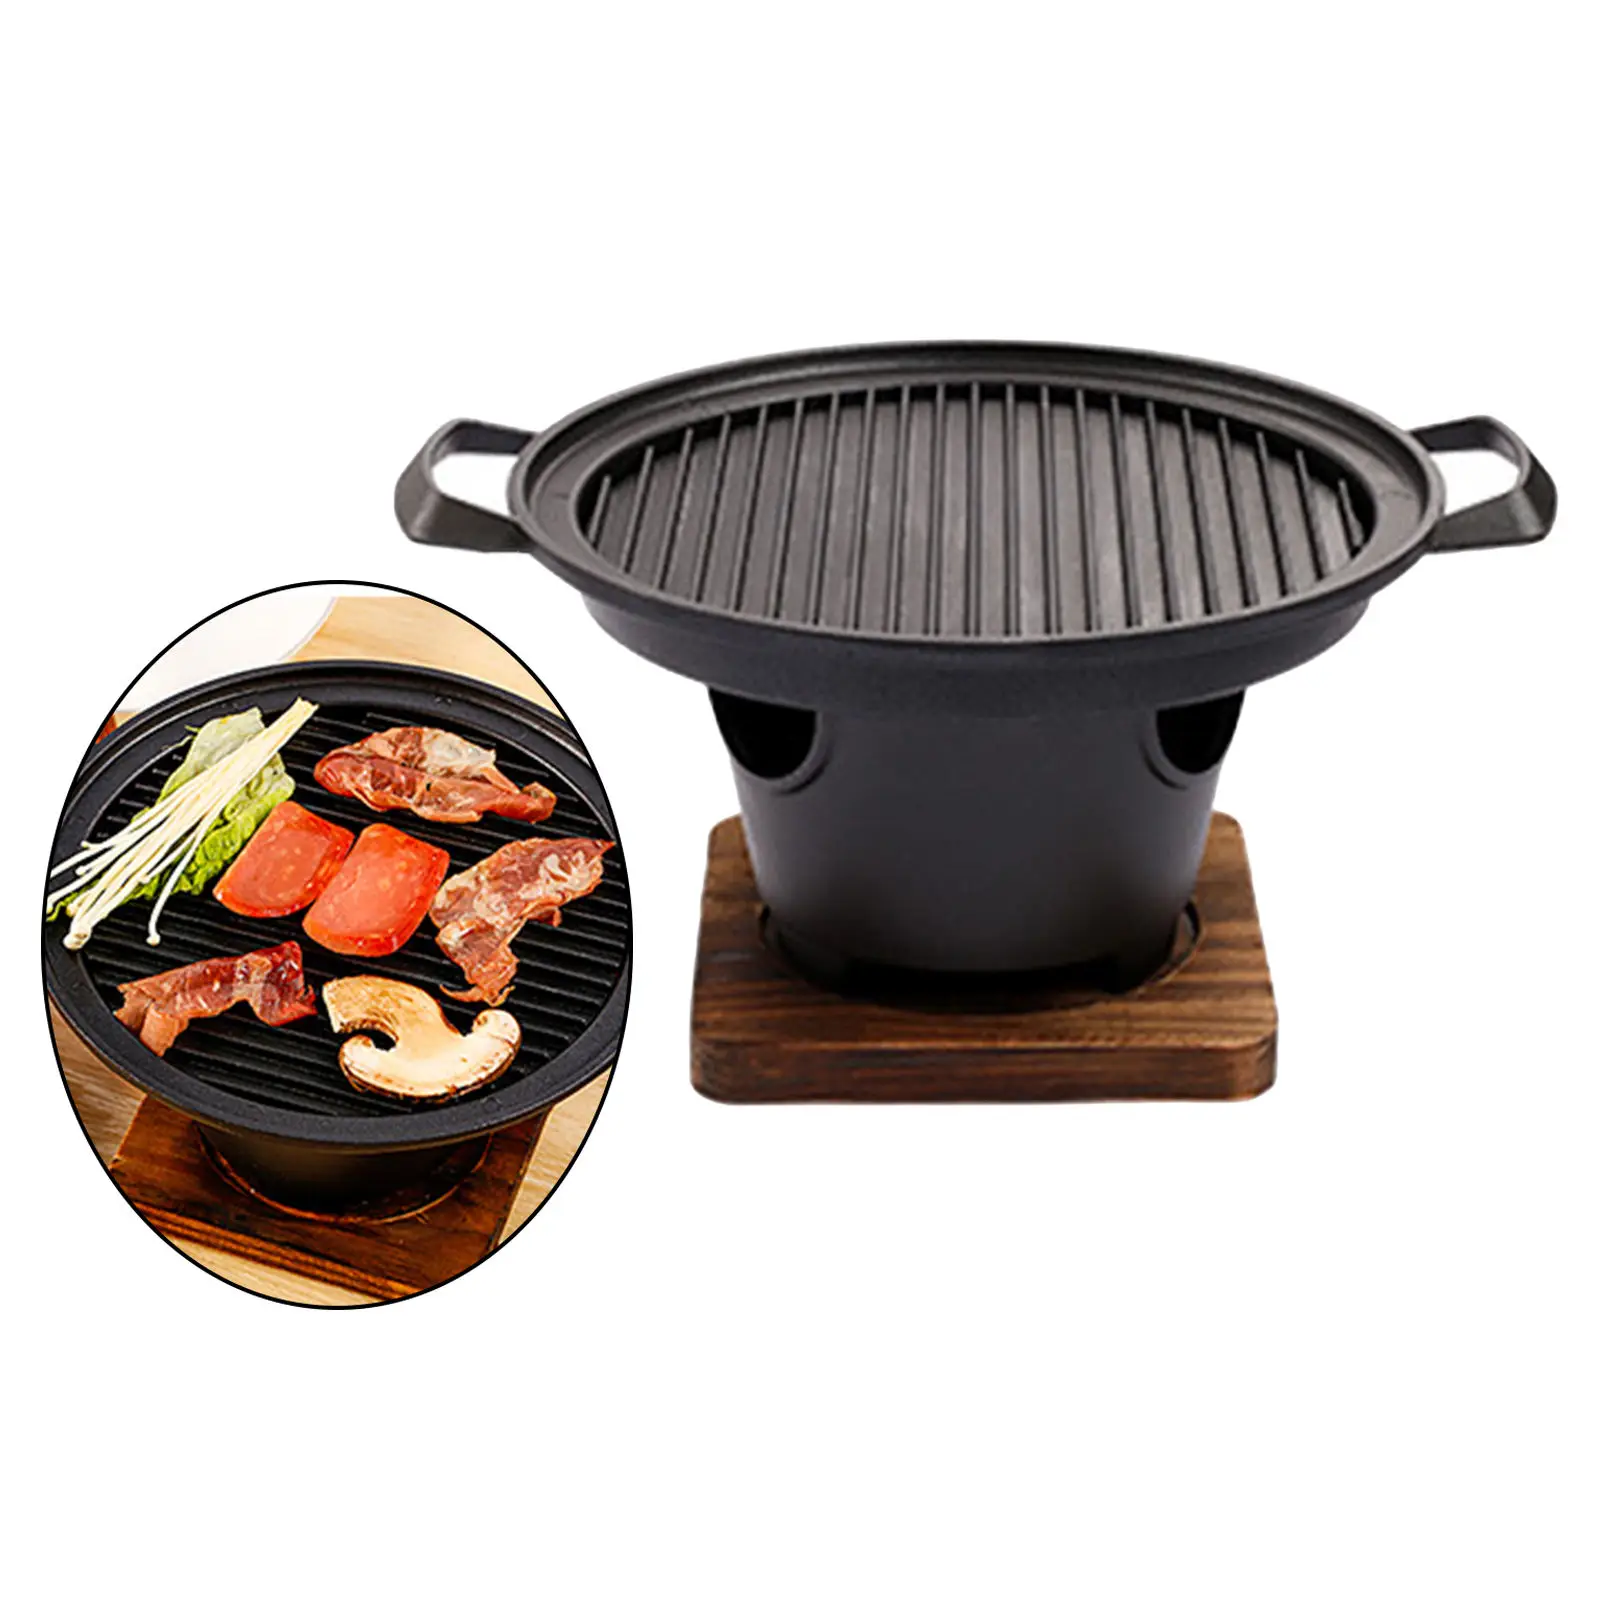 BBQ Grill BBQ Oven Plate Alcohol Stove Lightweight Triangular Furnace Table Grill Charcoal Grill Outdoor Cooker Tools